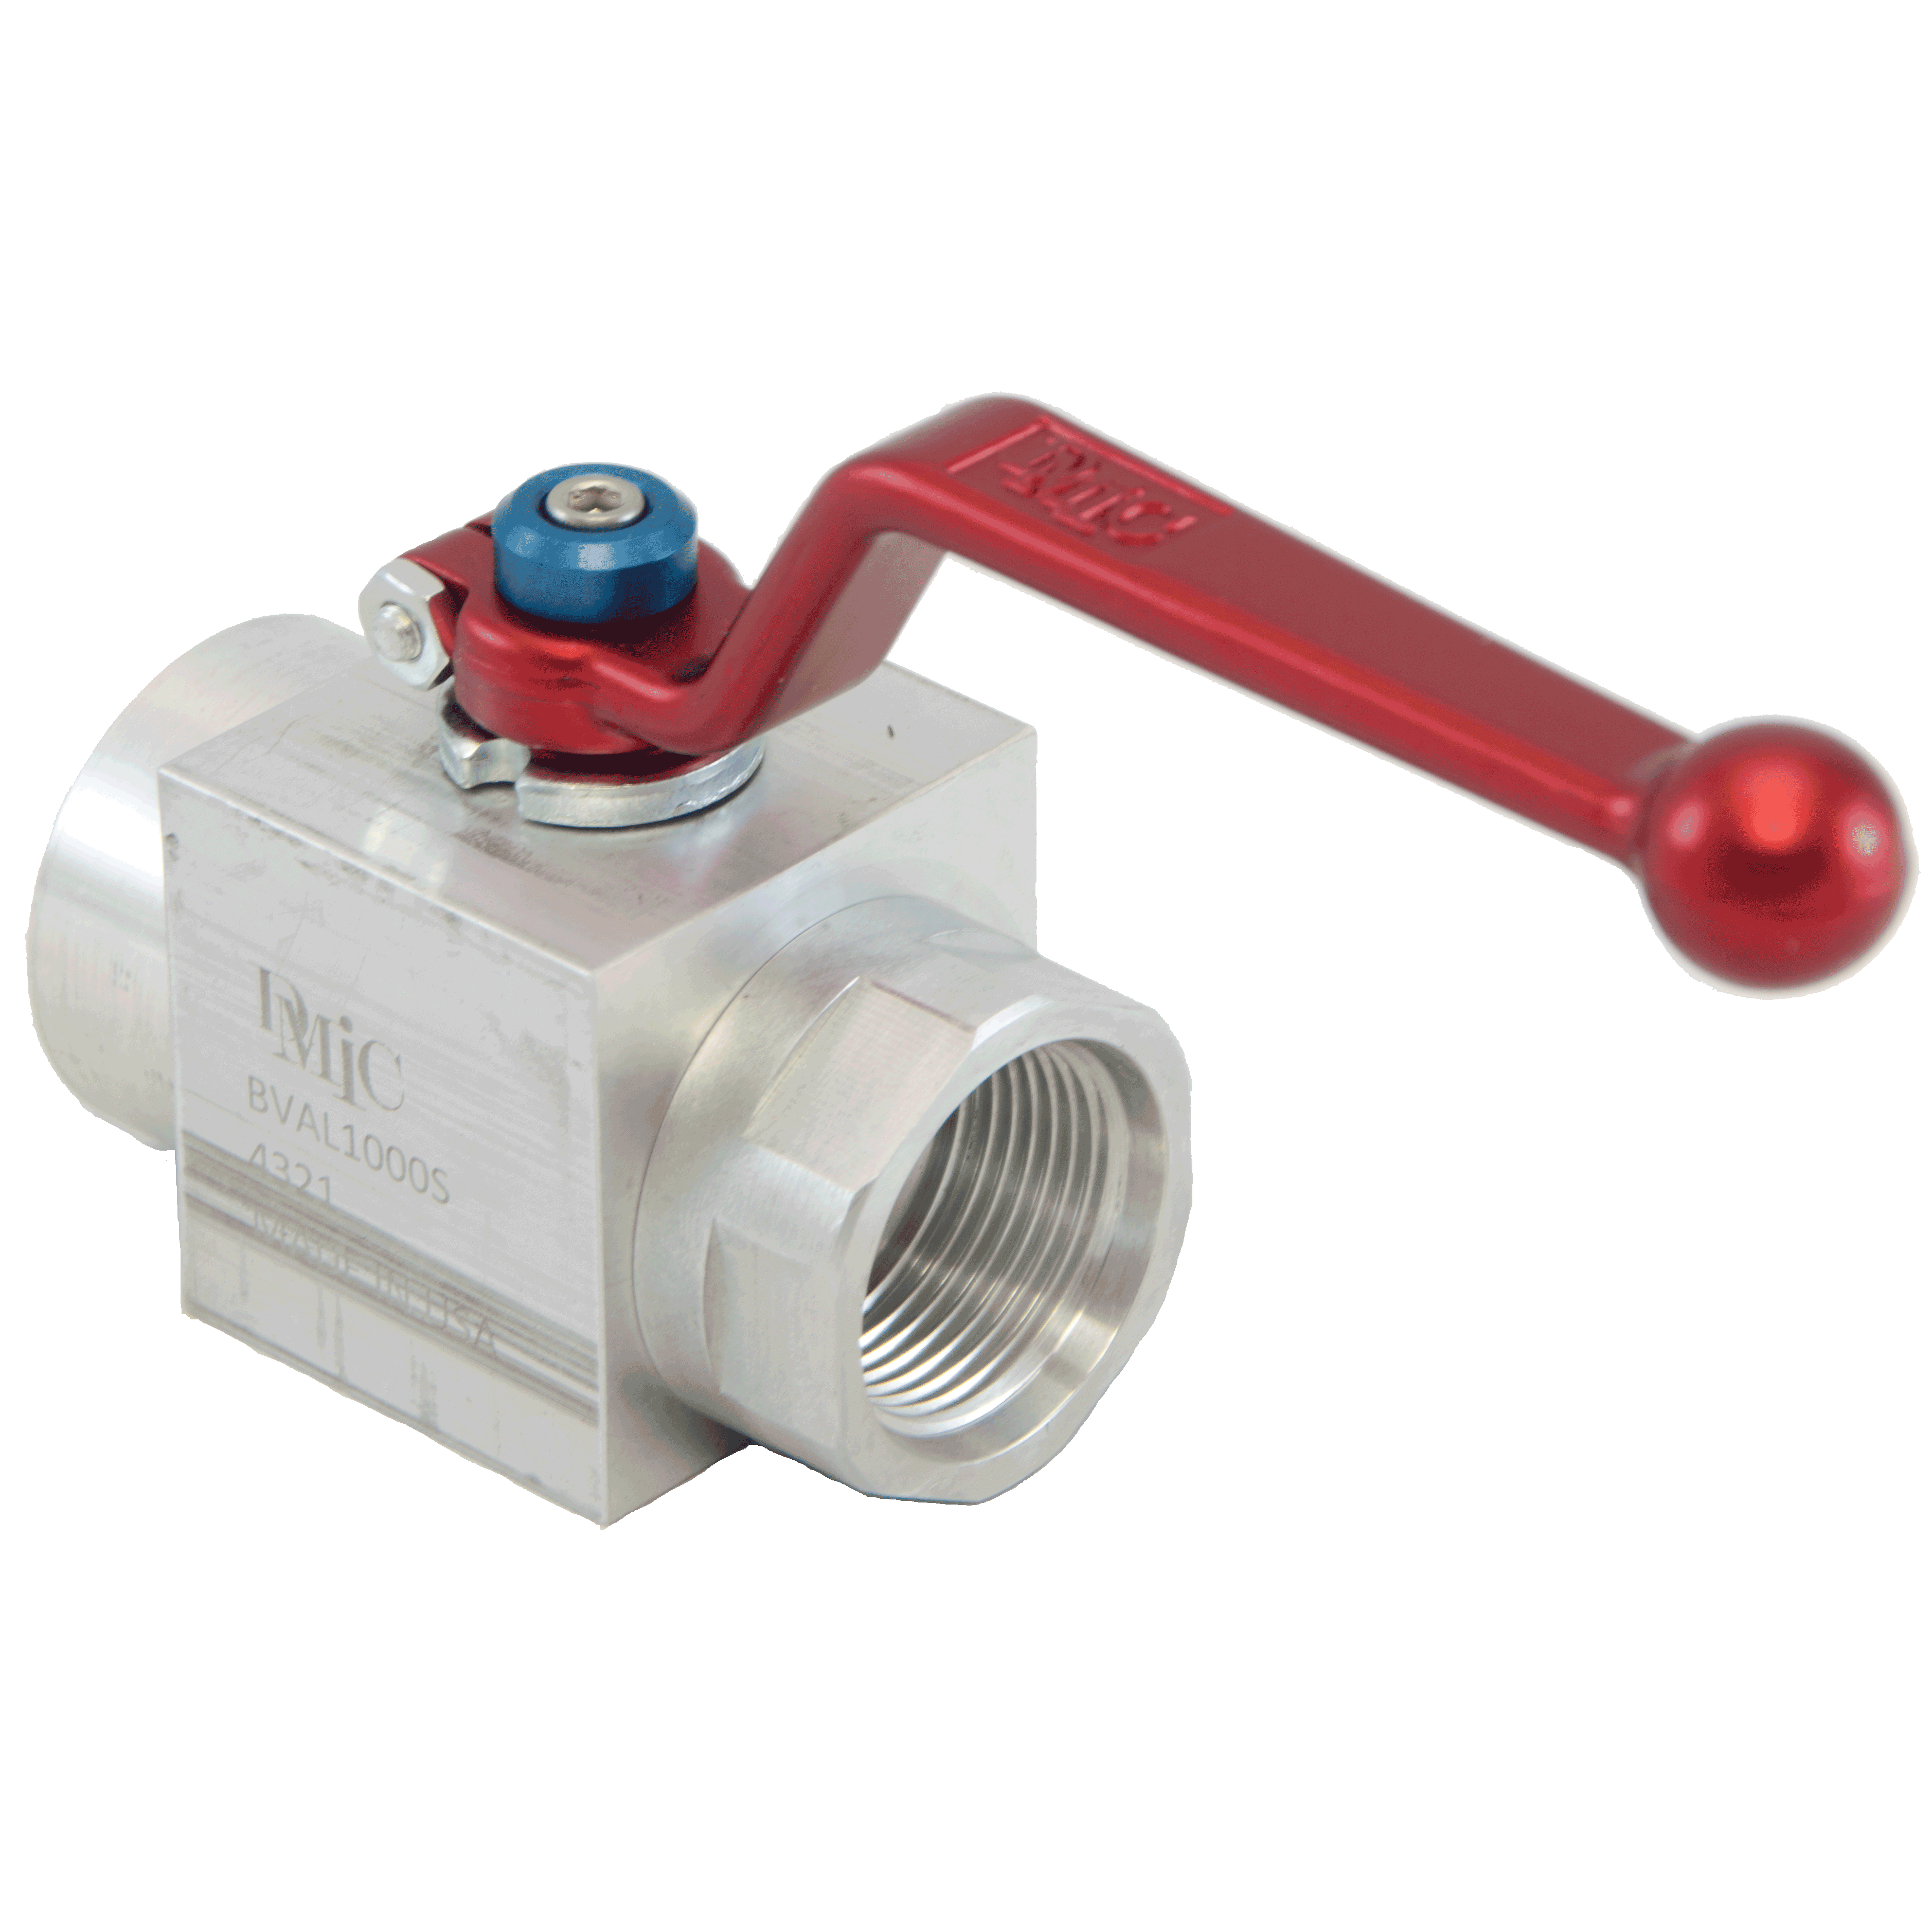 BVAL-1500N-4321-AZZN : DMIC Suction Ball Valve, 1.5 NPT, Aluminum, 600psi, Two-Way, with Locking Handle